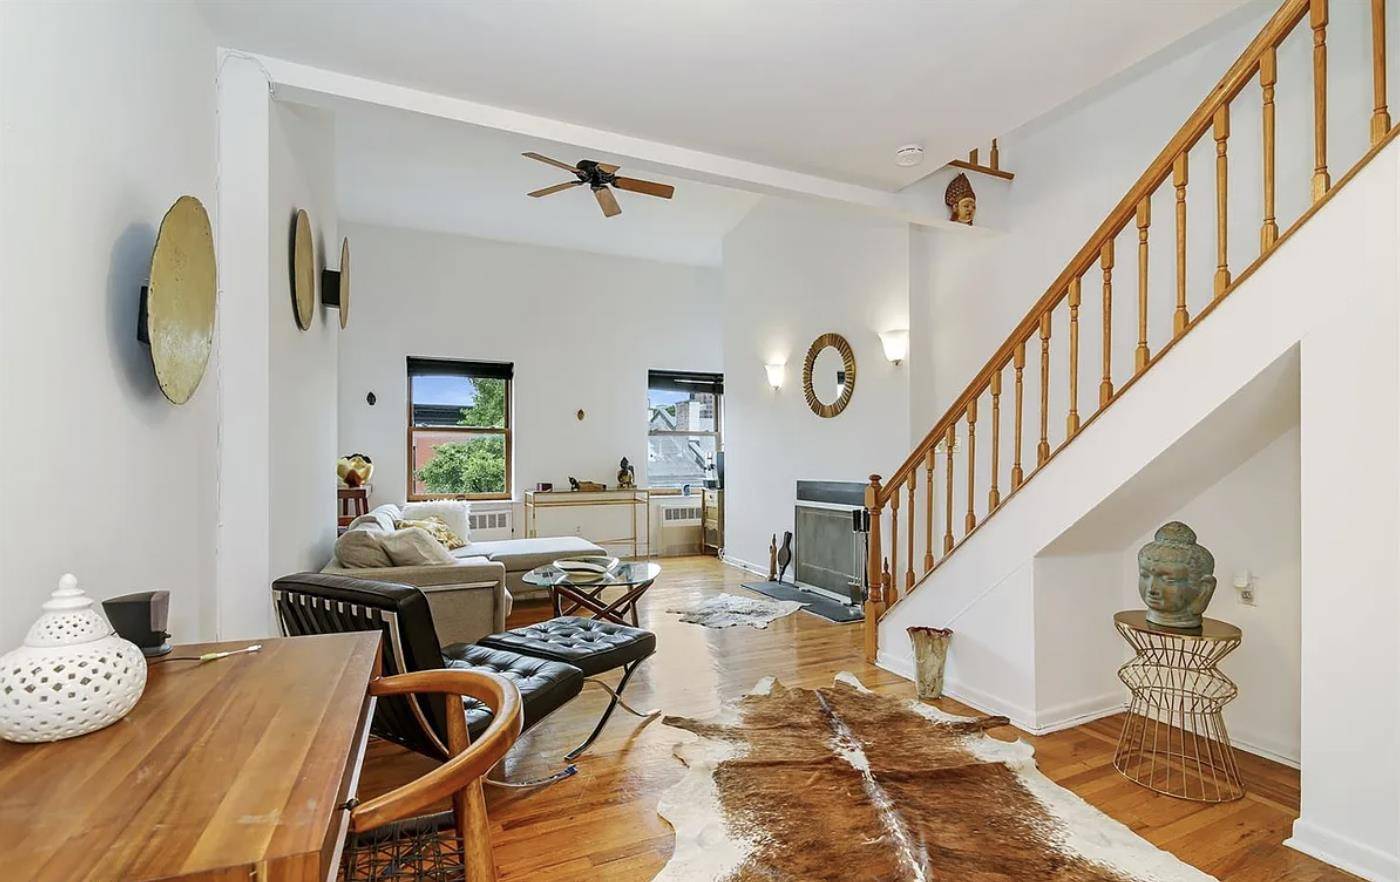 Located on a beautiful tree lined block just minutes from Atlantic Avenue, this spacious 1 bedroom loft offers hardwood floors, a wood burning fireplace, and windowed kitchen with generous cabinet ...